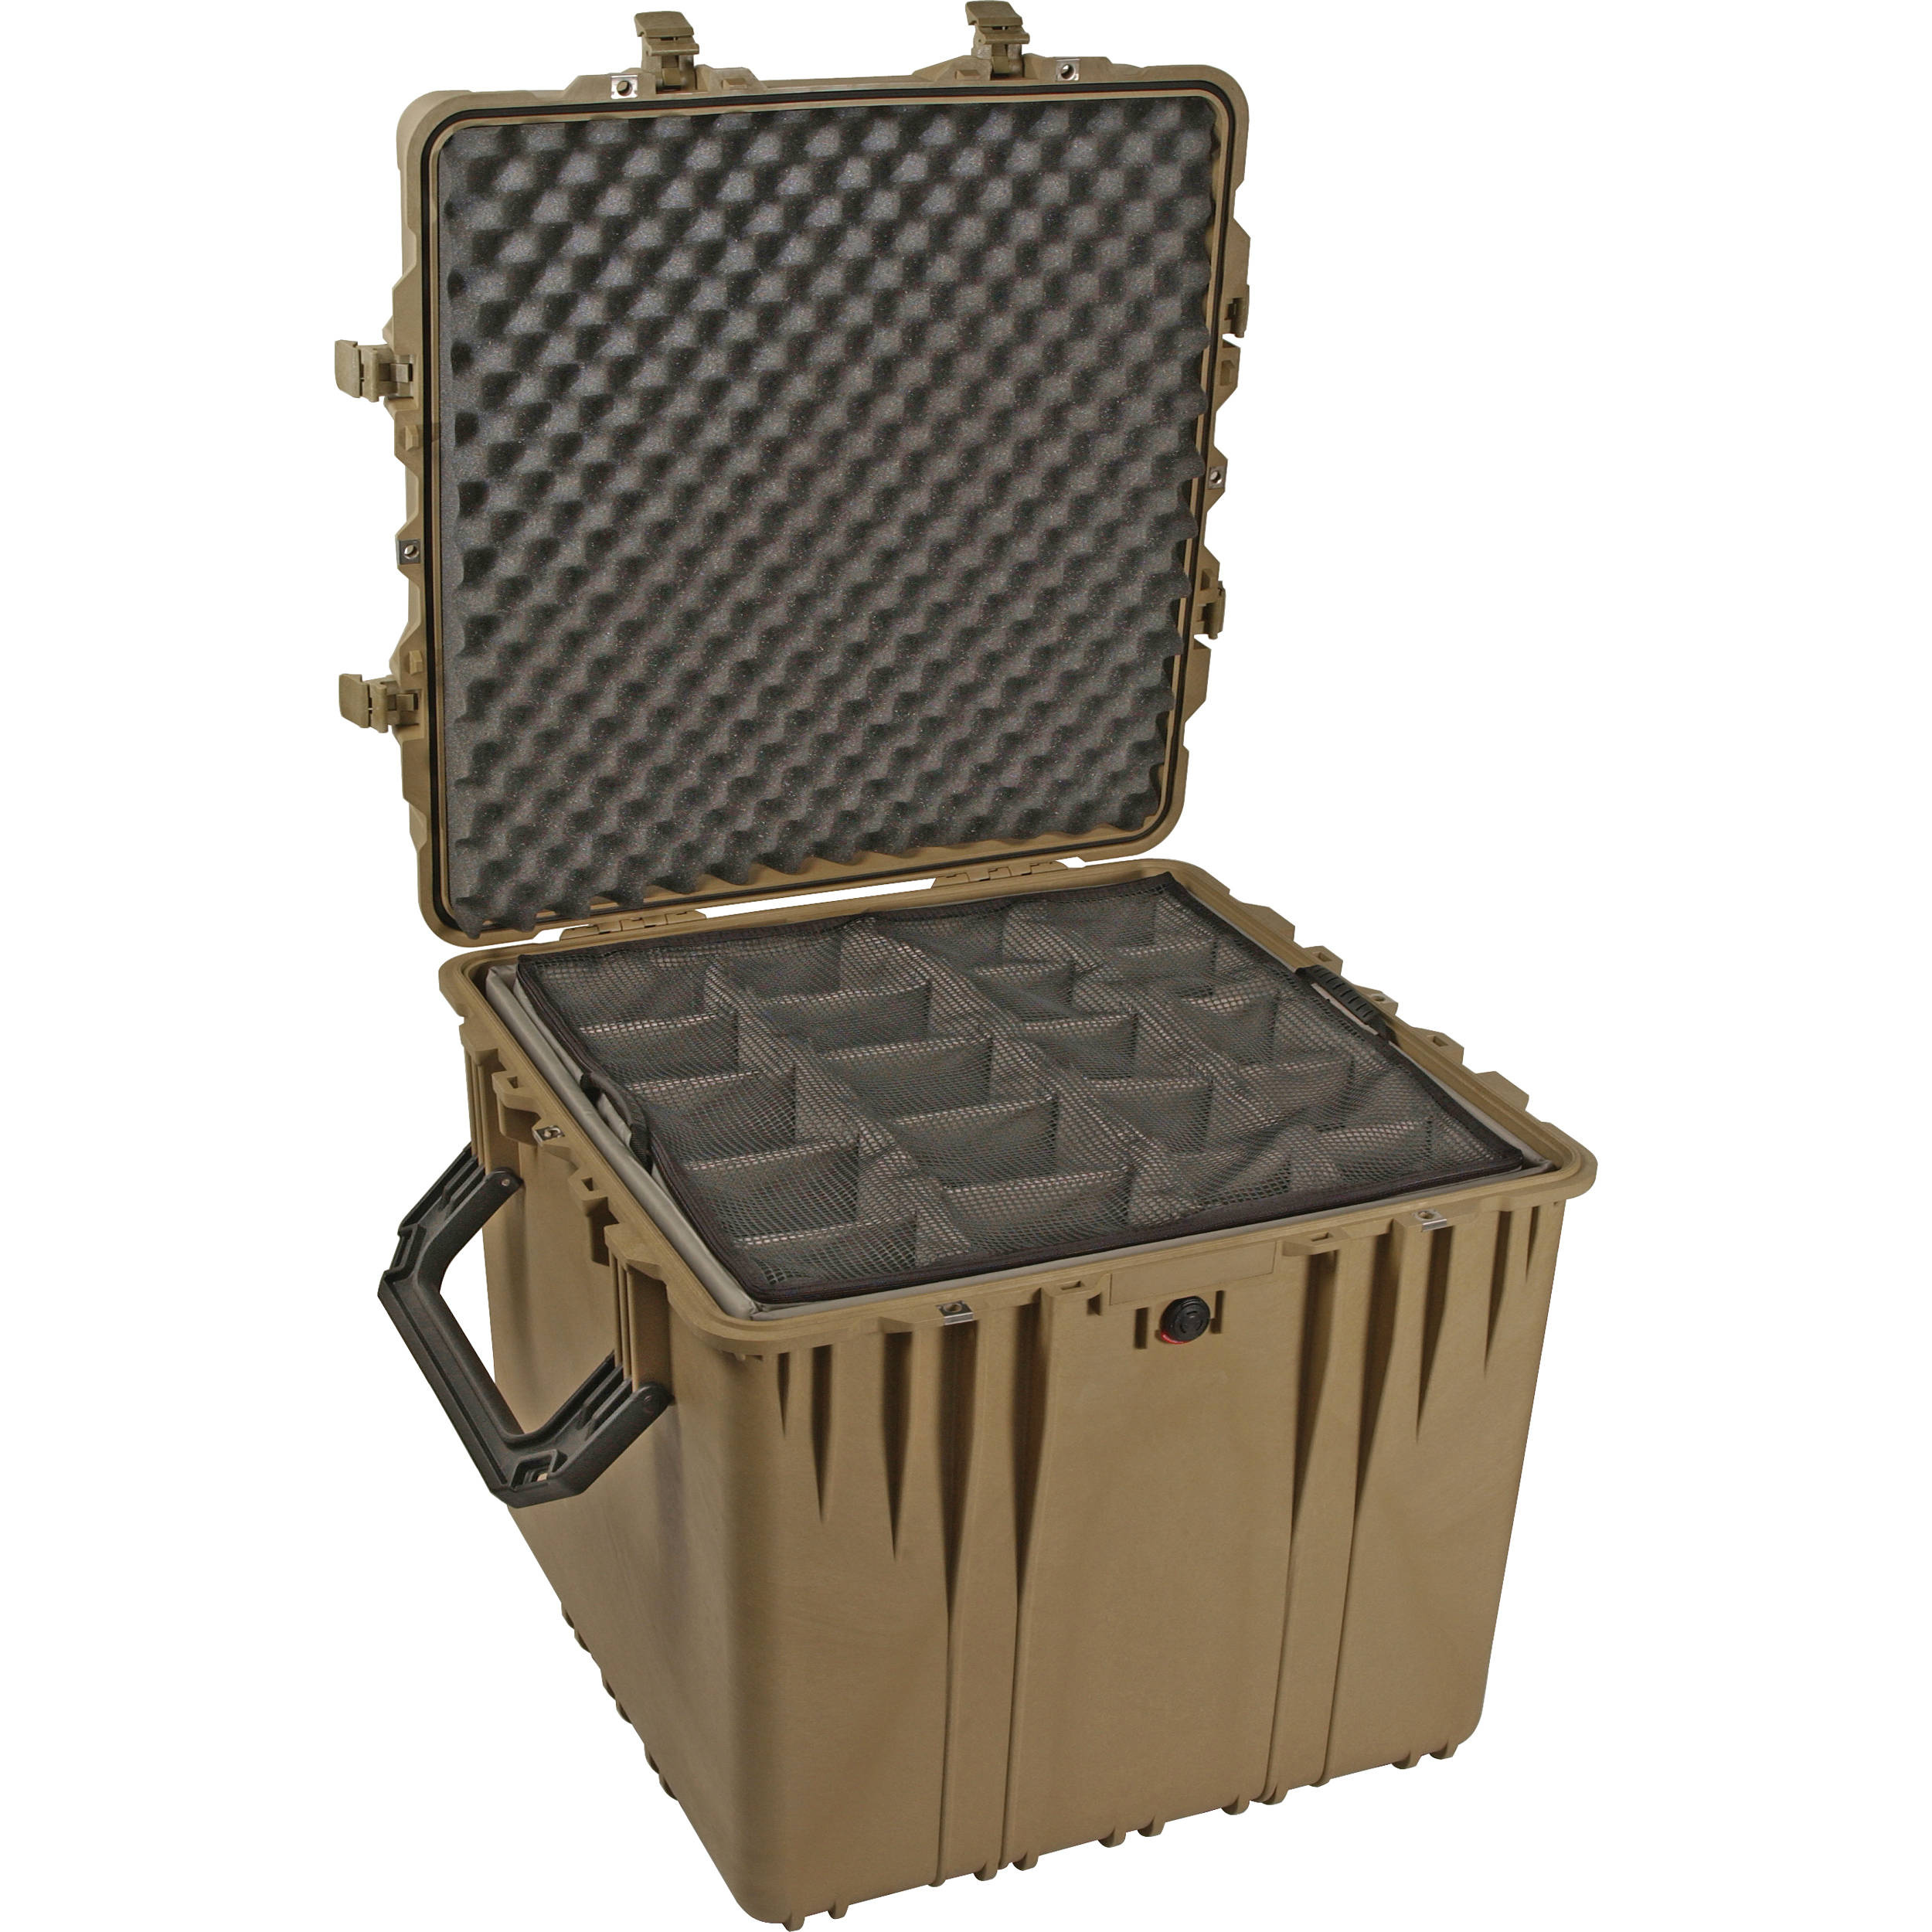 Pelican 0340 Cube Case with Padded Dividers (Desert Tan)